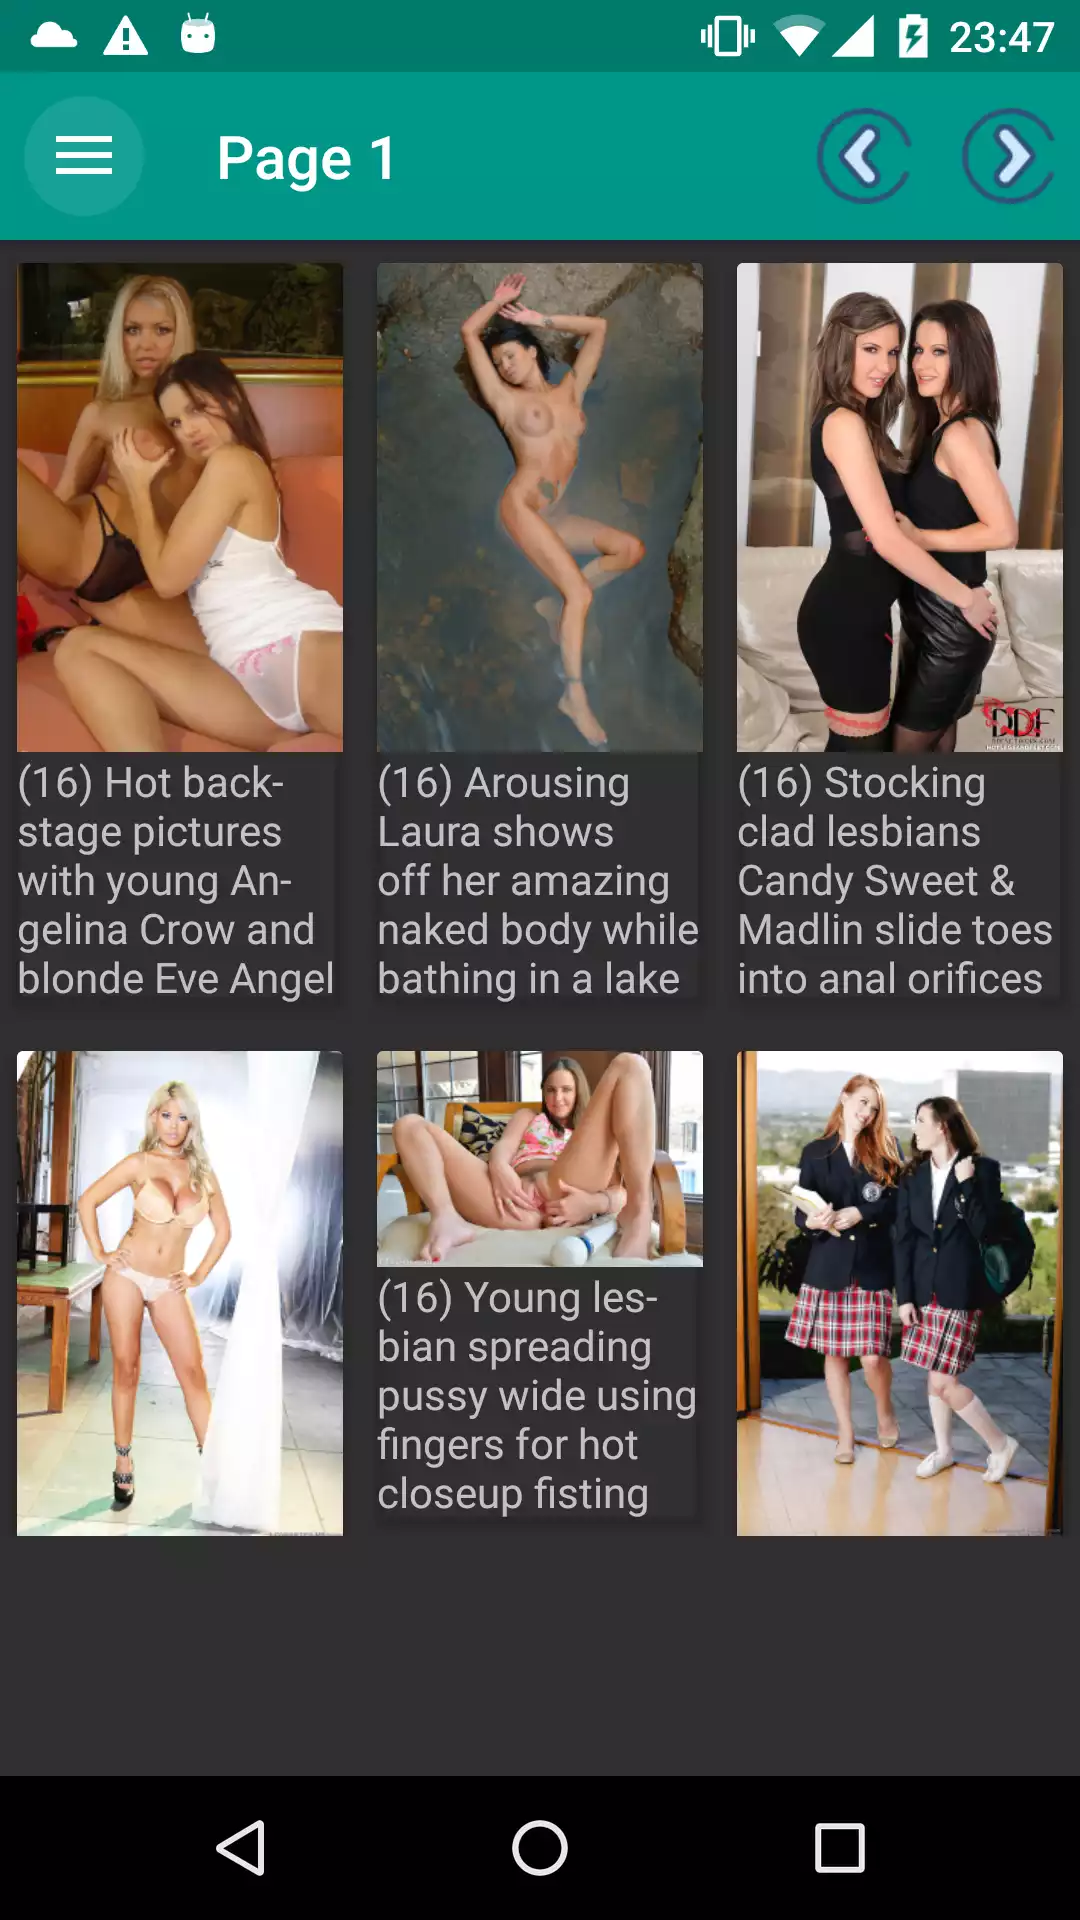 Lesbian Galleries apps,hentaipics,pornstar,app,pic,photos,new,porn,pictures,hentei,hot,picture,sexy,anime,photo,ster,apk,galleries,pics,adult,hentai